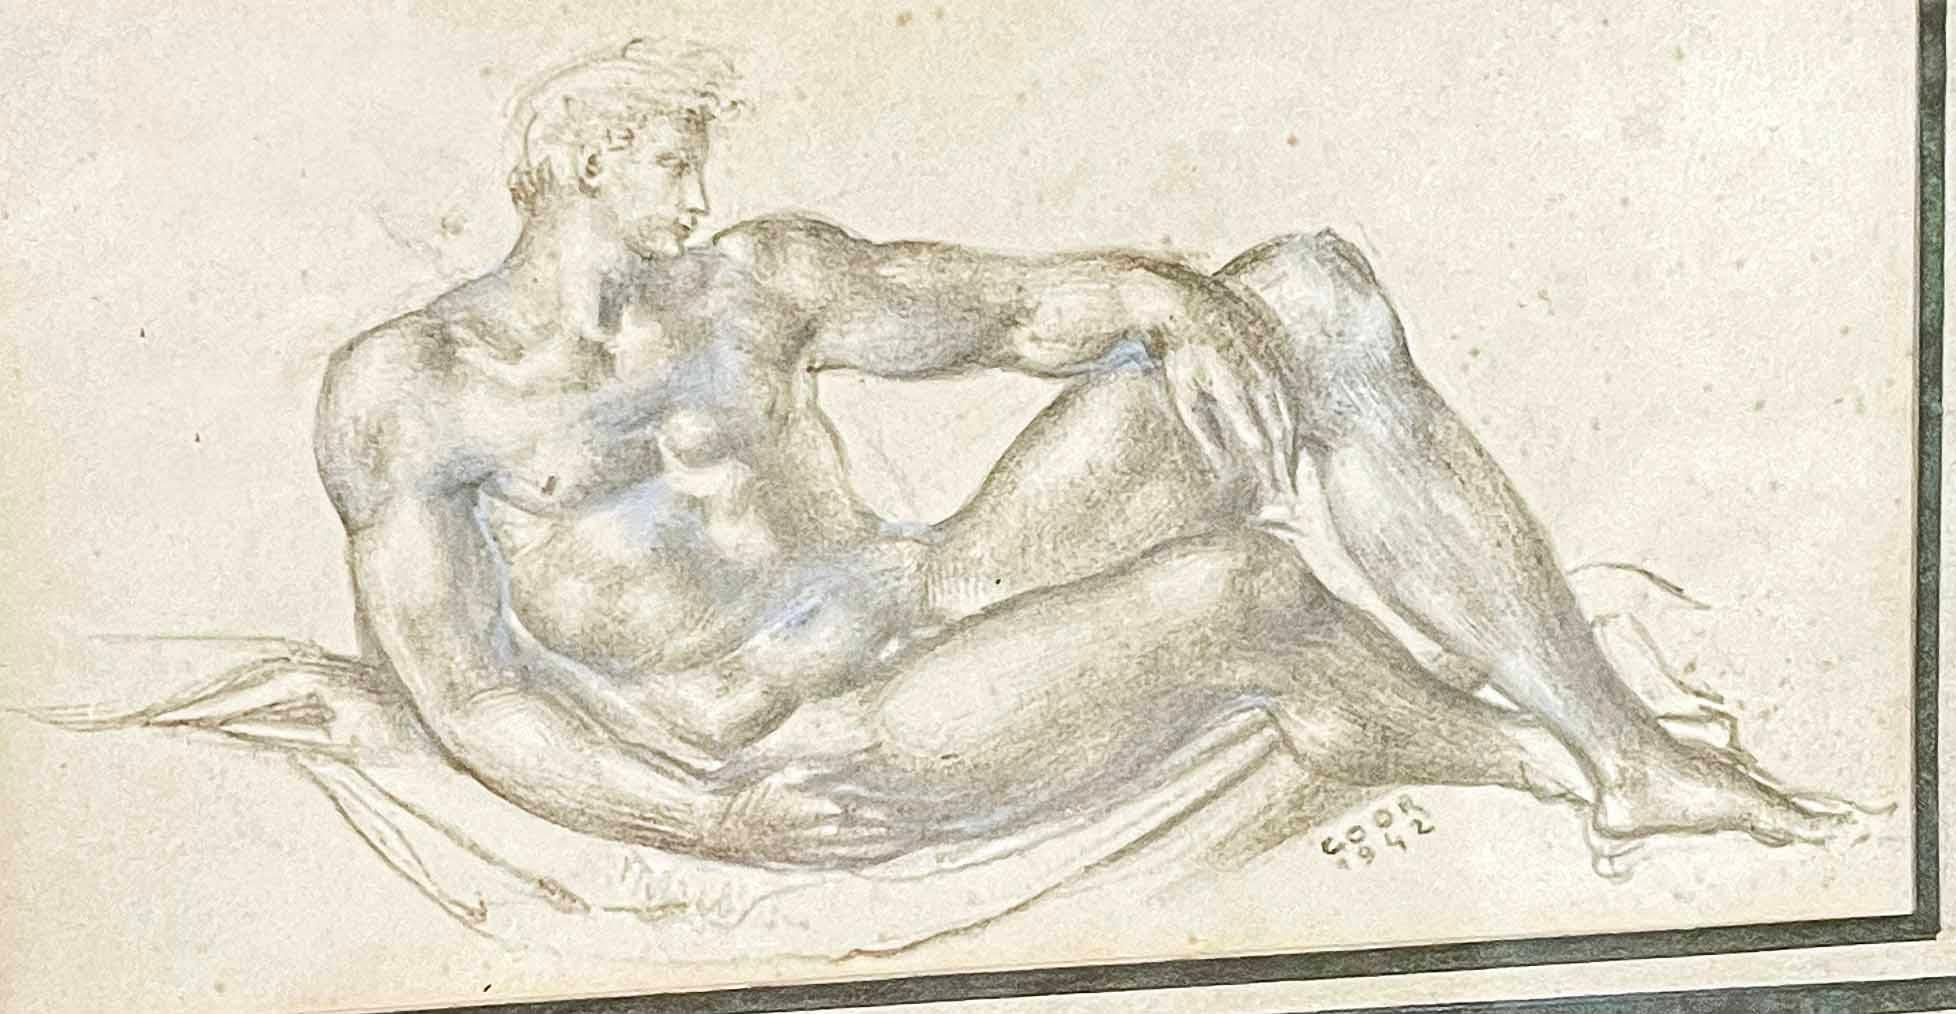 Created at the height of the Art Deco period, in 1940s France, but clearly inspired by the monumental male nudes of Michelangelo and the high Renaissance in Italy, this 1942 drawing of a reclining male nude was drawn by Gaston Goor and incorporated